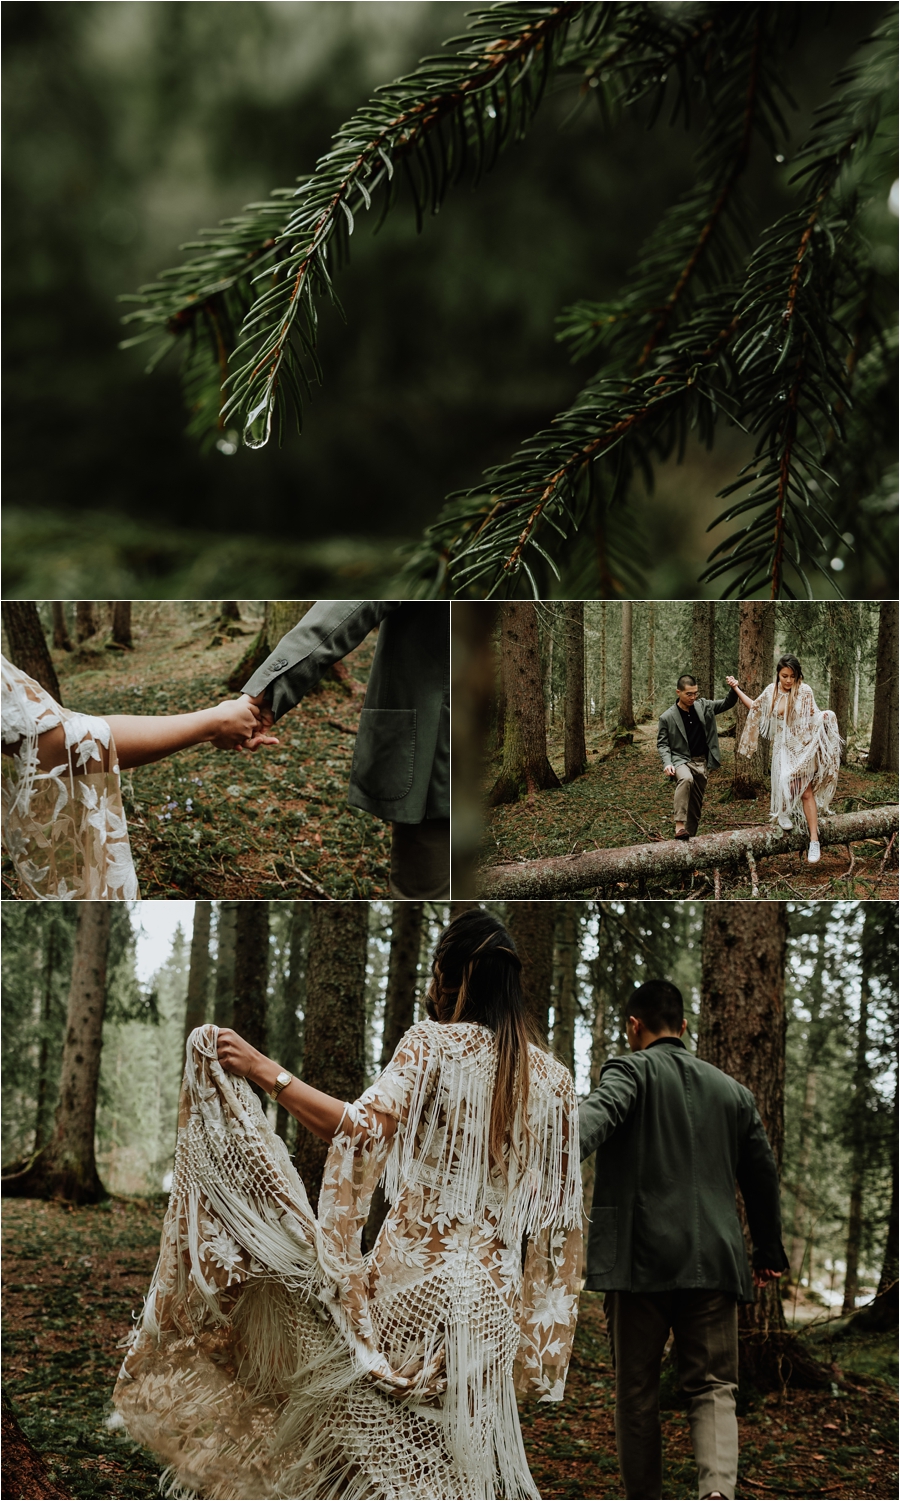 Exploring the forests in the Dolomites - A pre-wedding engagement shoot by Wild Connections Photography